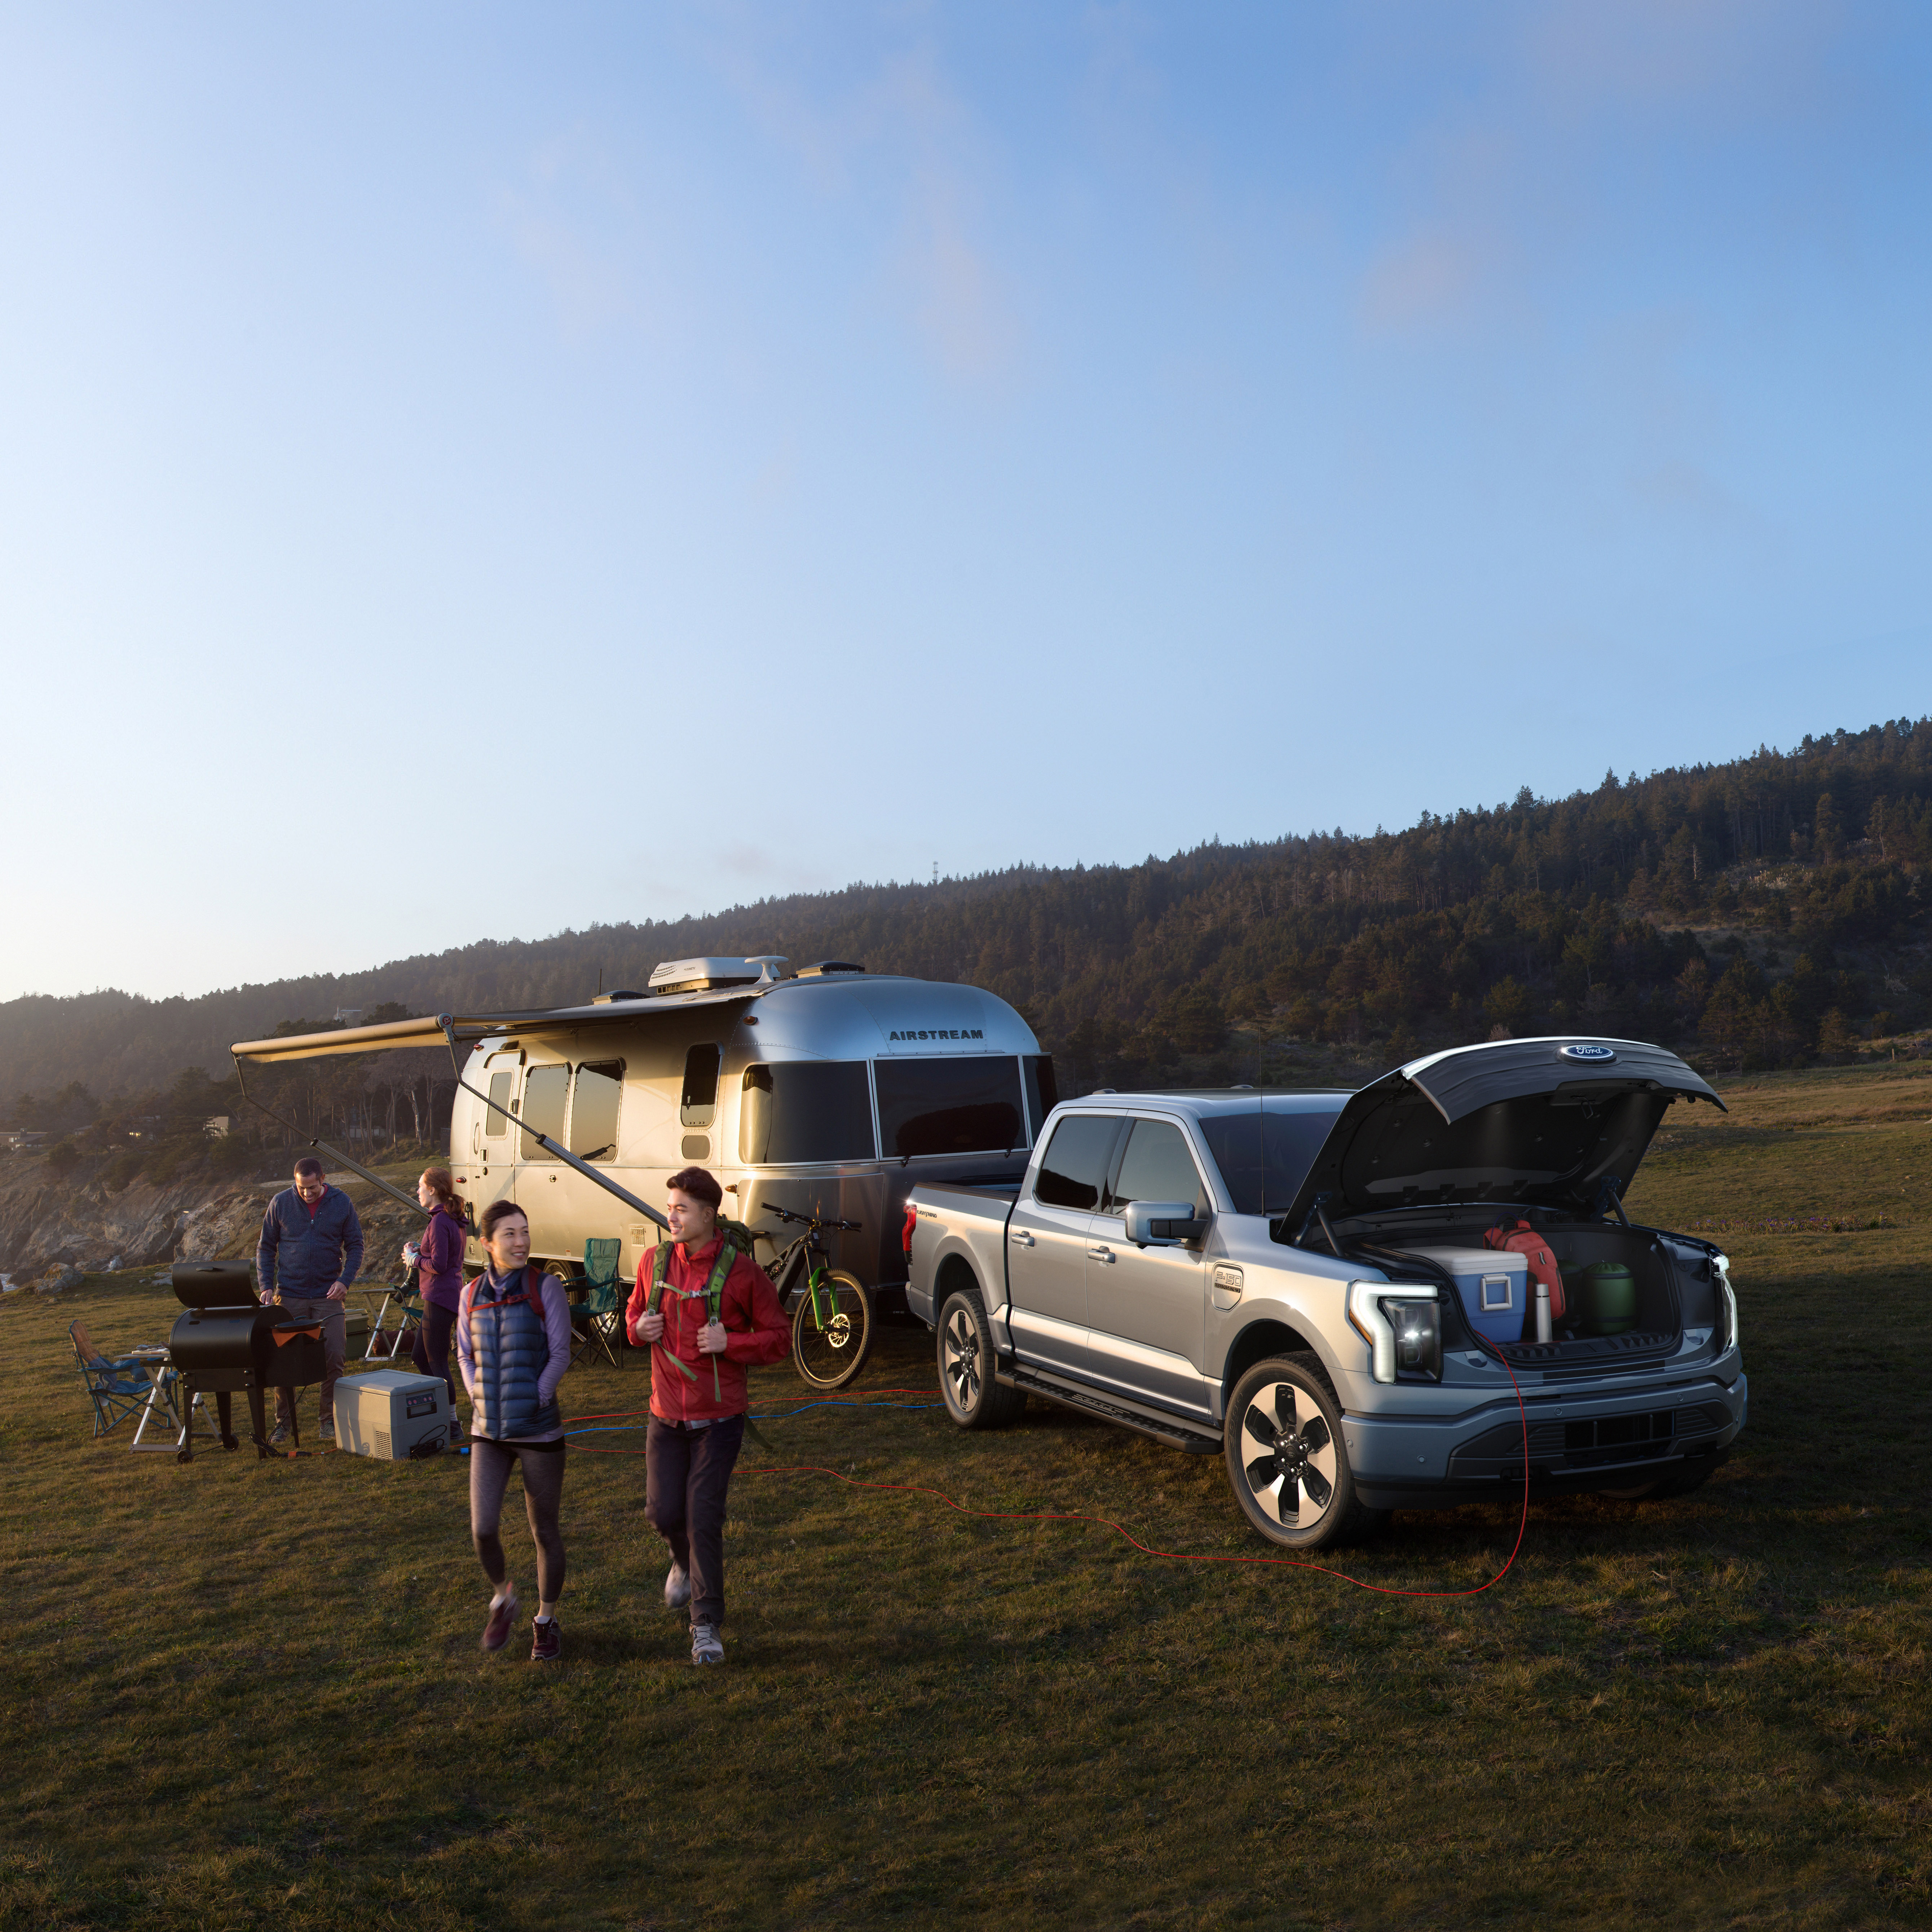 The new F-150 Lightning with the front trunk open at an outdoor campsite on a scenic hill.